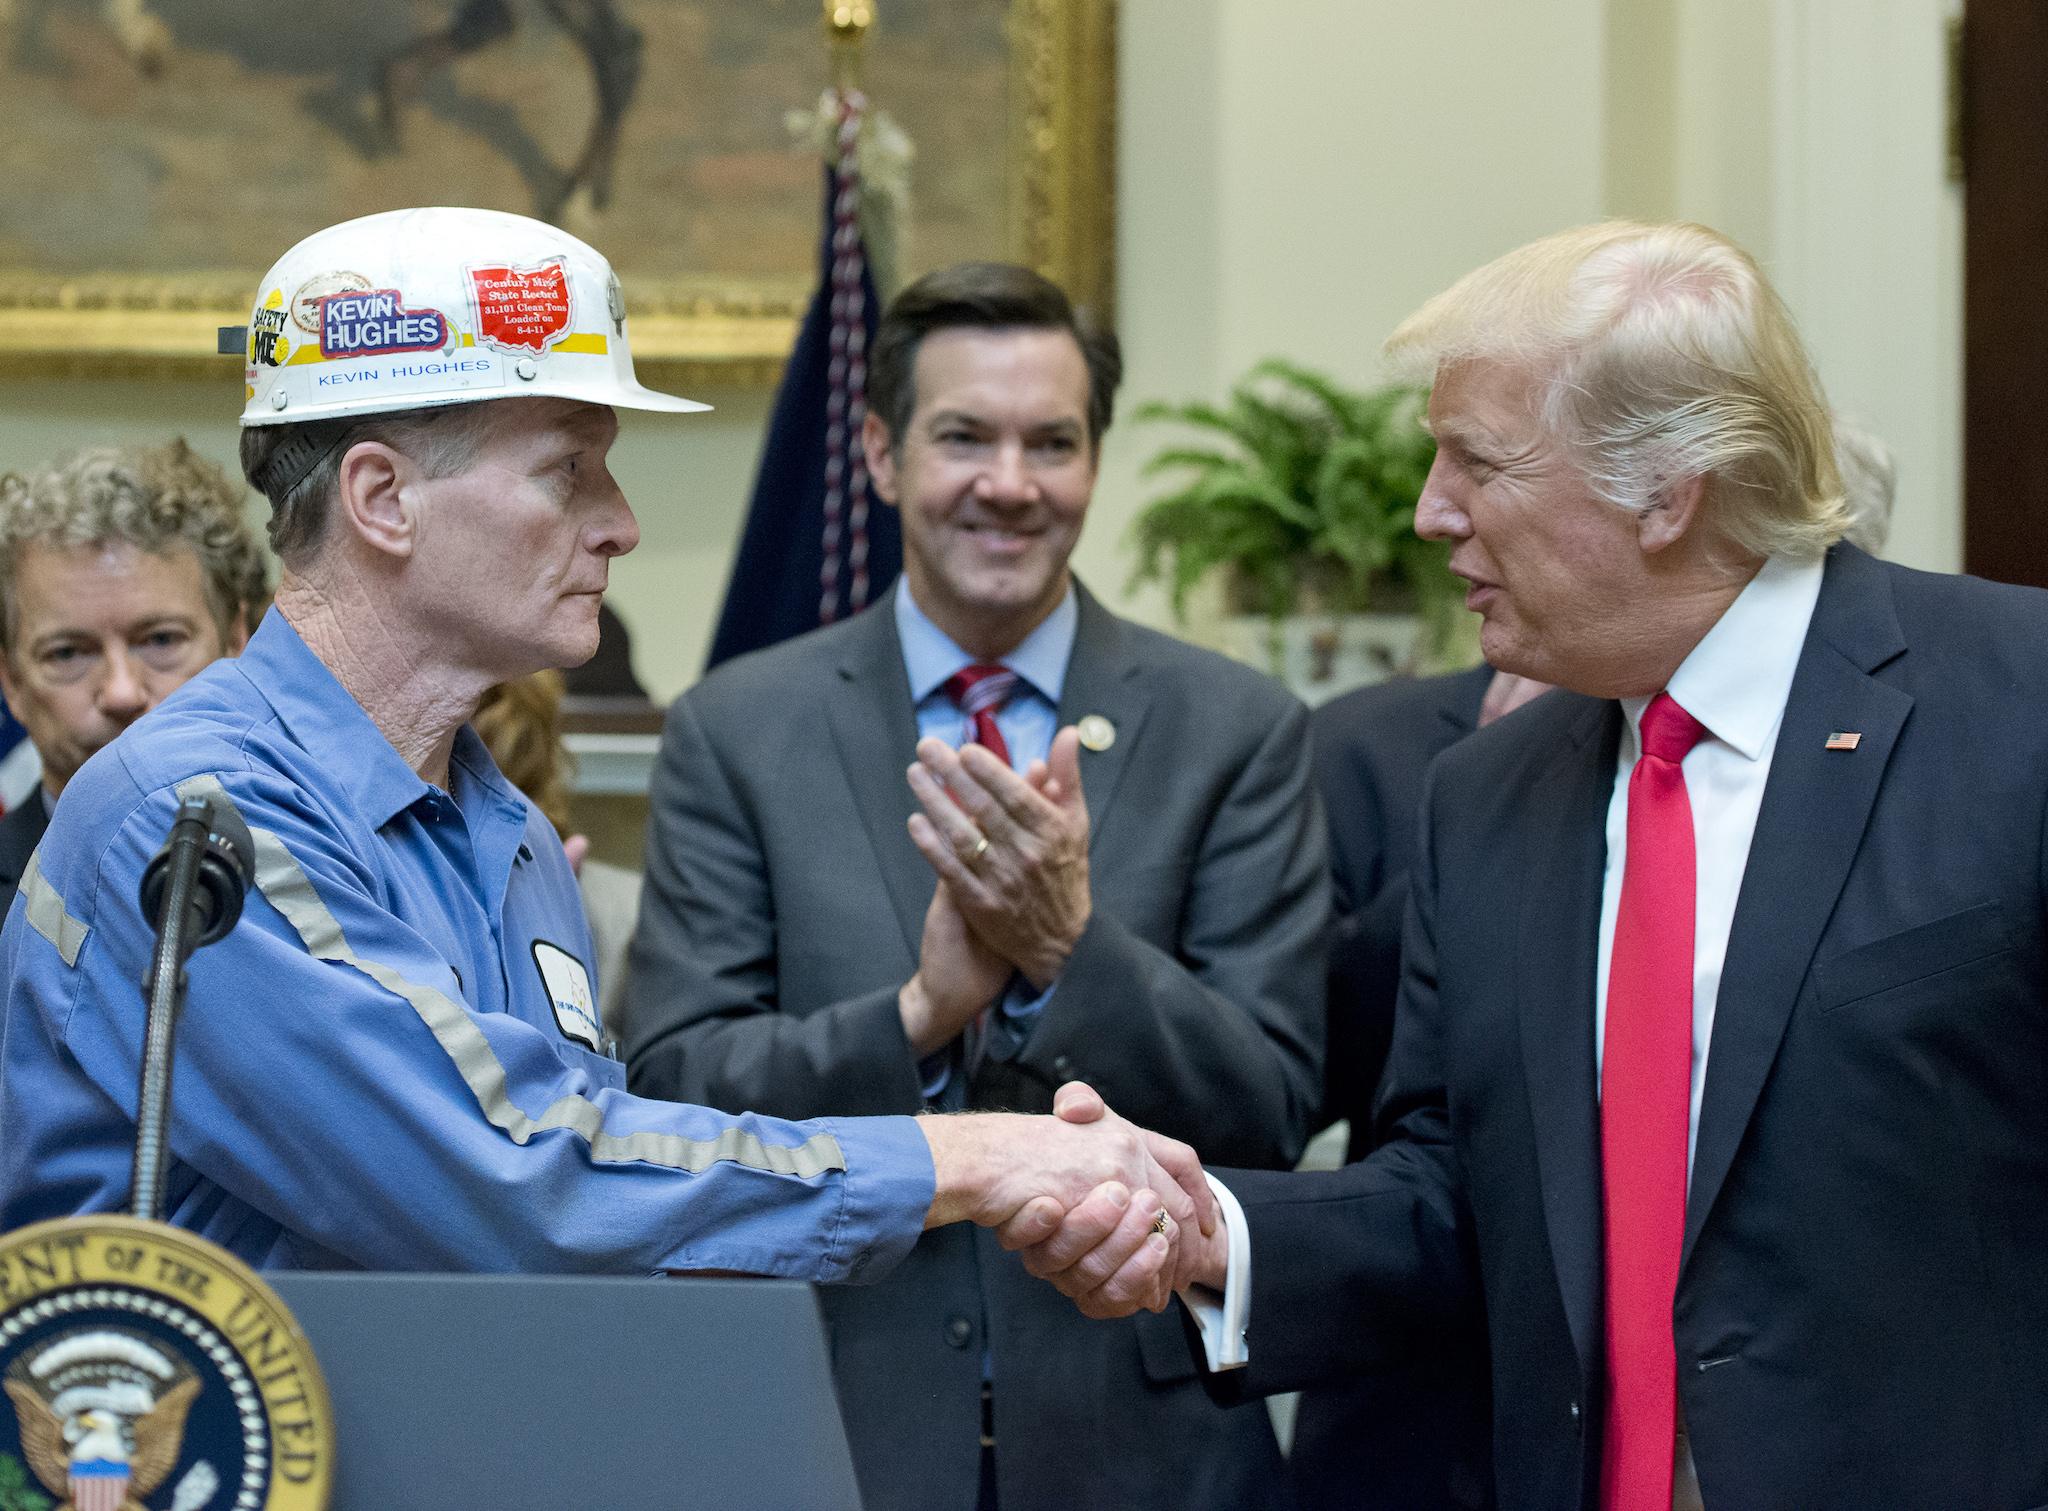 A coal miner identified as Kevin shakes hands with U.S. President Donald Trump prior to the President signing H.J. Res. 38, disapproving the rule submitted by the US Department of the Interior known as the Stream Protection Rule in the Roosevelt Room of the White House on February 16, 2017 in Washington, DC